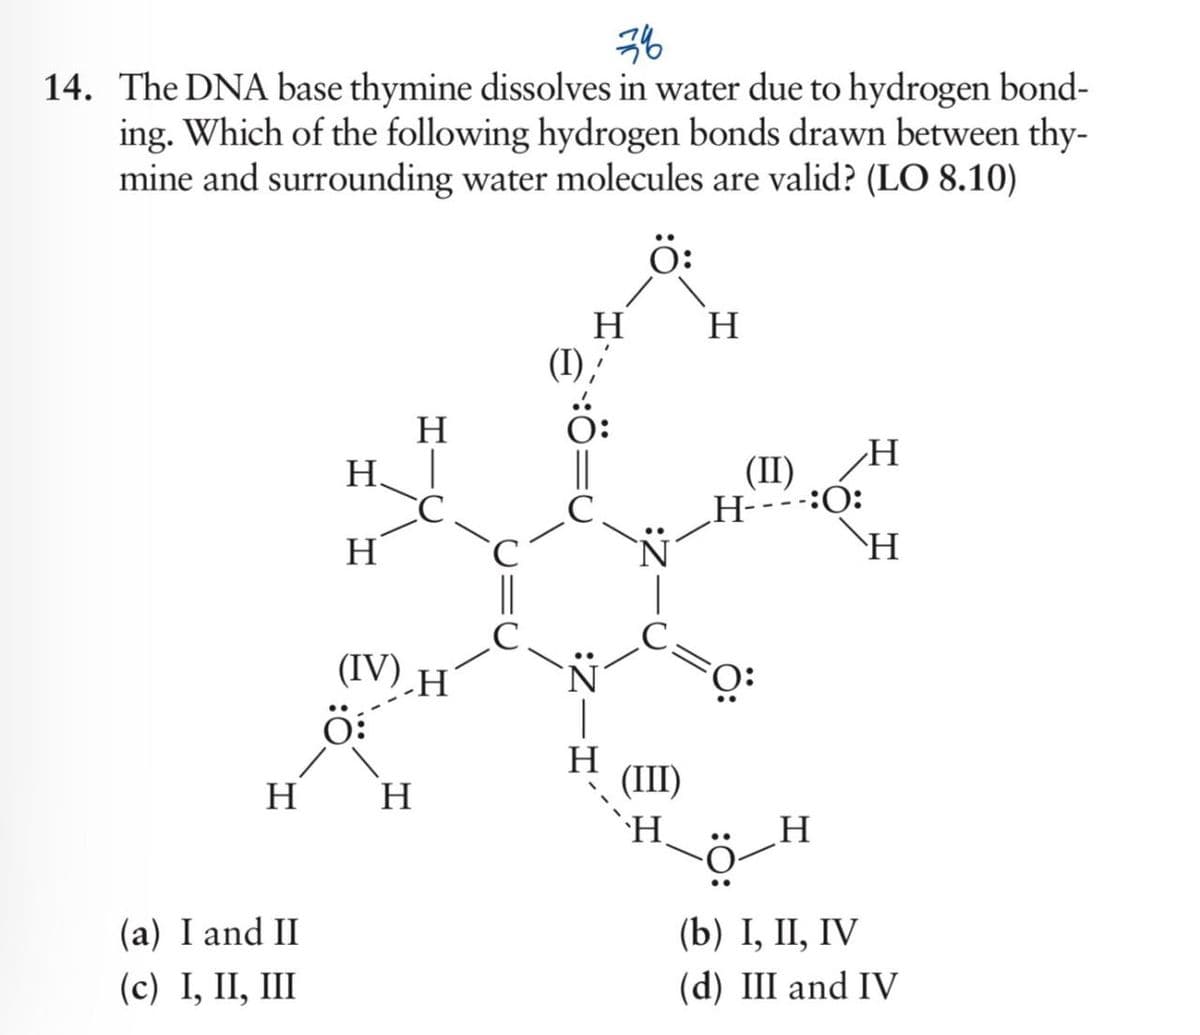 76
14. The DNA base thymine dissolves in water due to hydrogen bond-
ing. Which of the following hydrogen bonds drawn between thy-
mine and surrounding water molecules are valid? (LO 8.10)
H
H|
H
(IV) H
H
H
(I)'
(II)
H
H----:O:
H
H
H
H
(III)
H
H
(a) I and II
(c) I, II, III
(b) I, II, IV
(d) III and IV